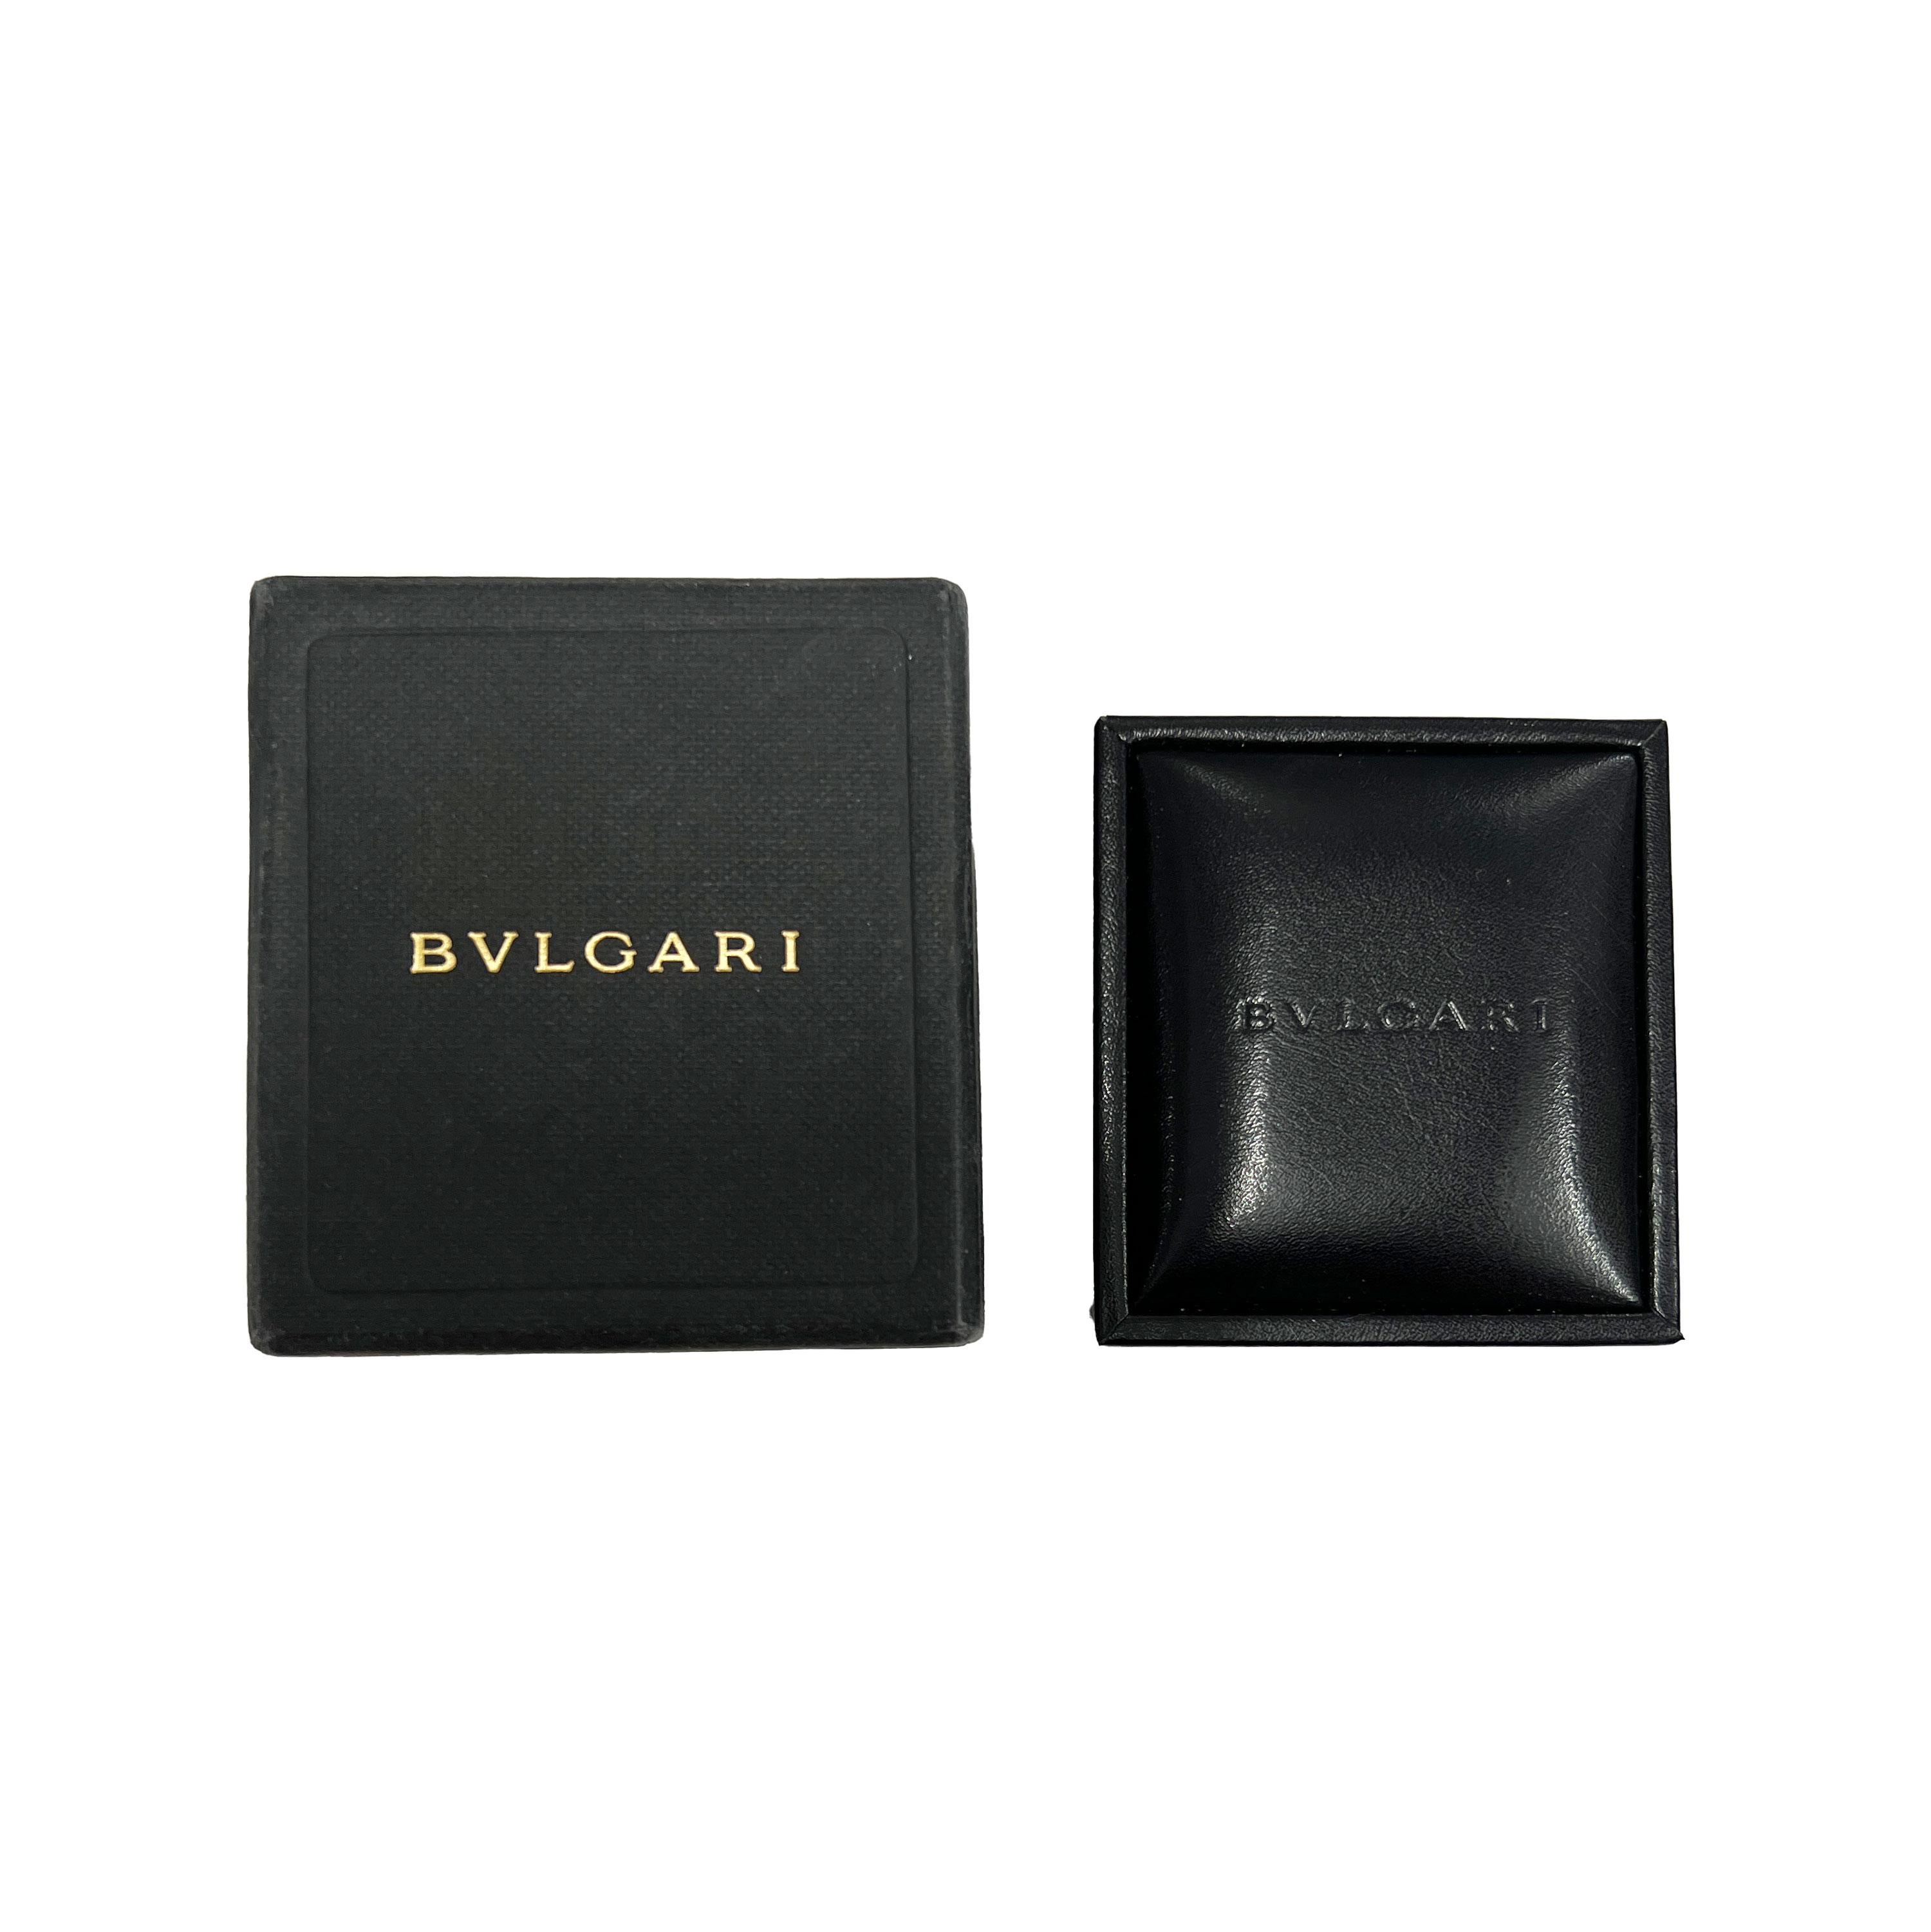 Bvlgari B.Zero1 Diamond Ring in 18k White Gold 2.24ctw In Excellent Condition For Sale In New York, NY